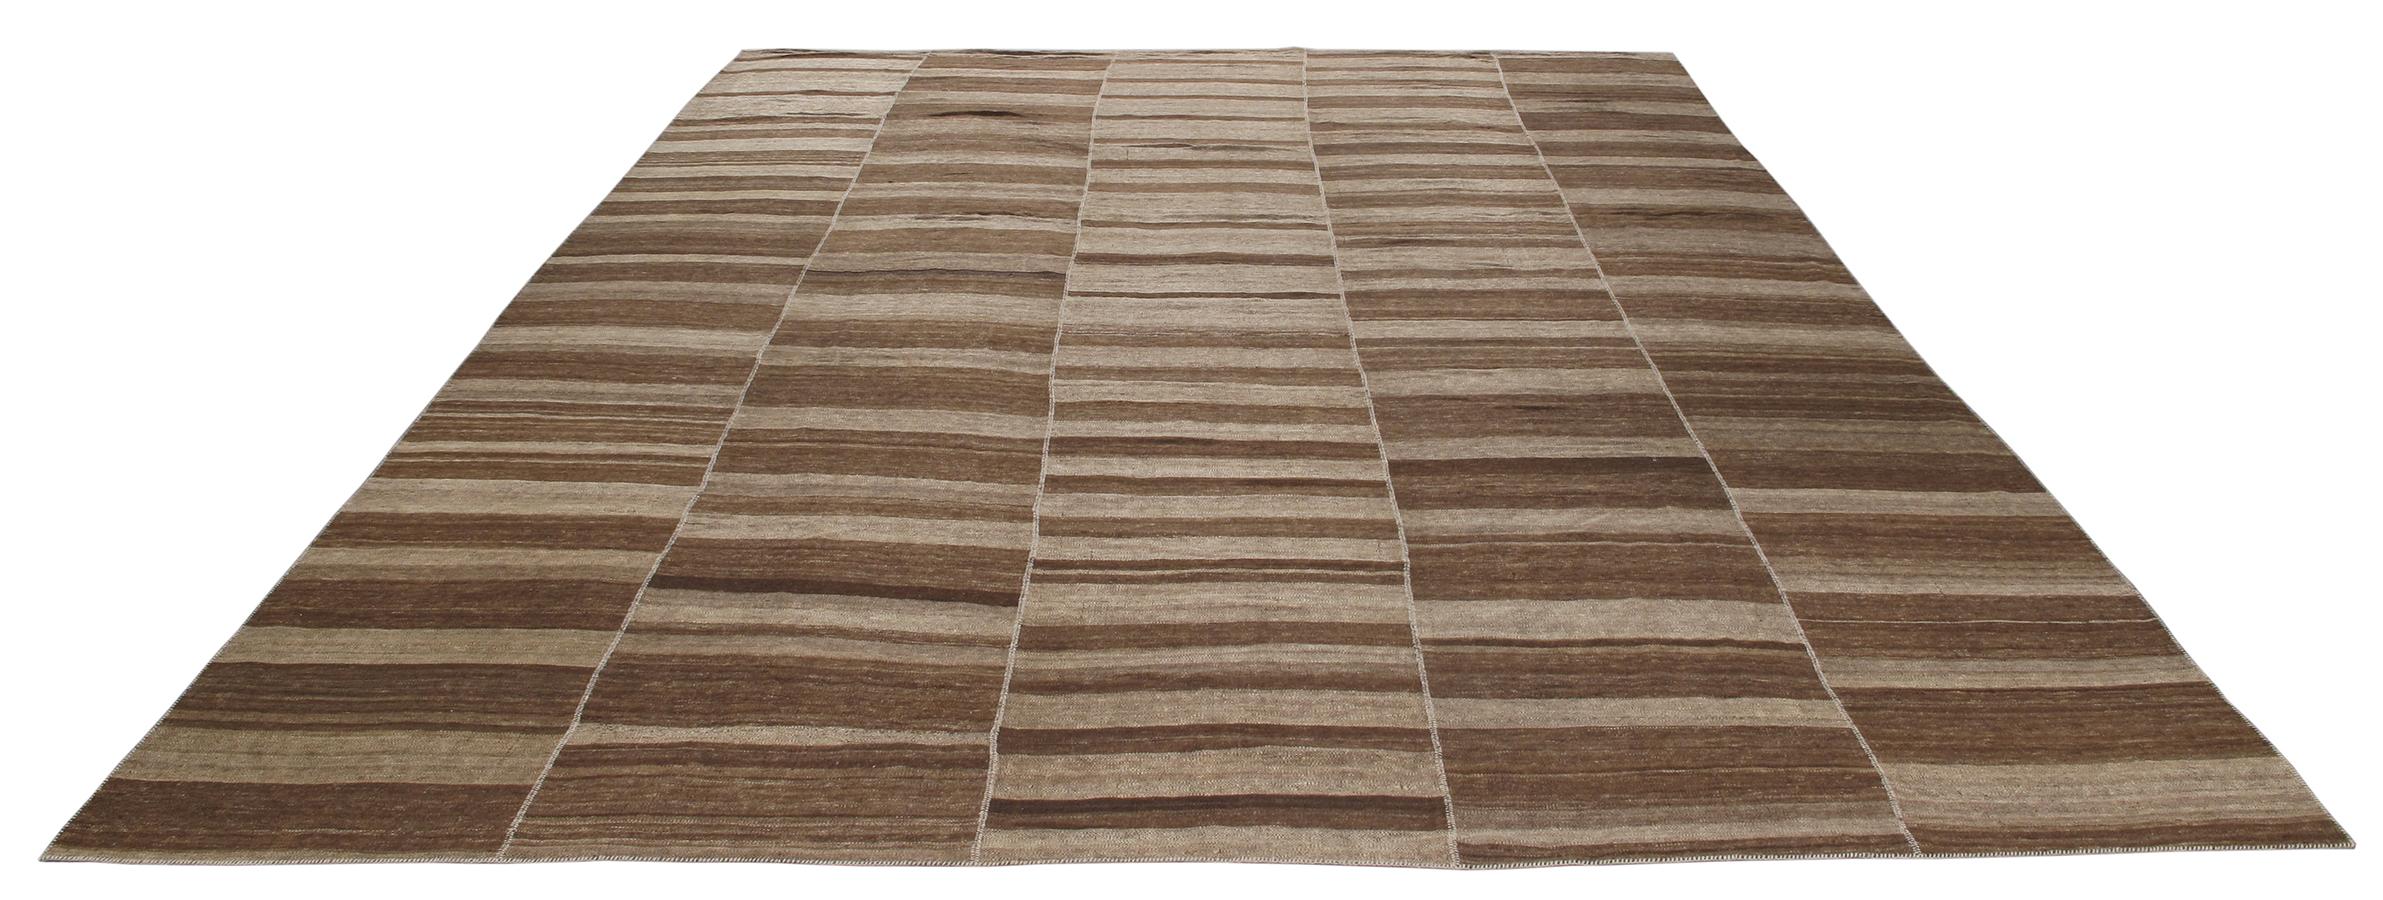 Hand-Woven Vintage Mid-Century Modern Persian Flat-Weave Rug For Sale